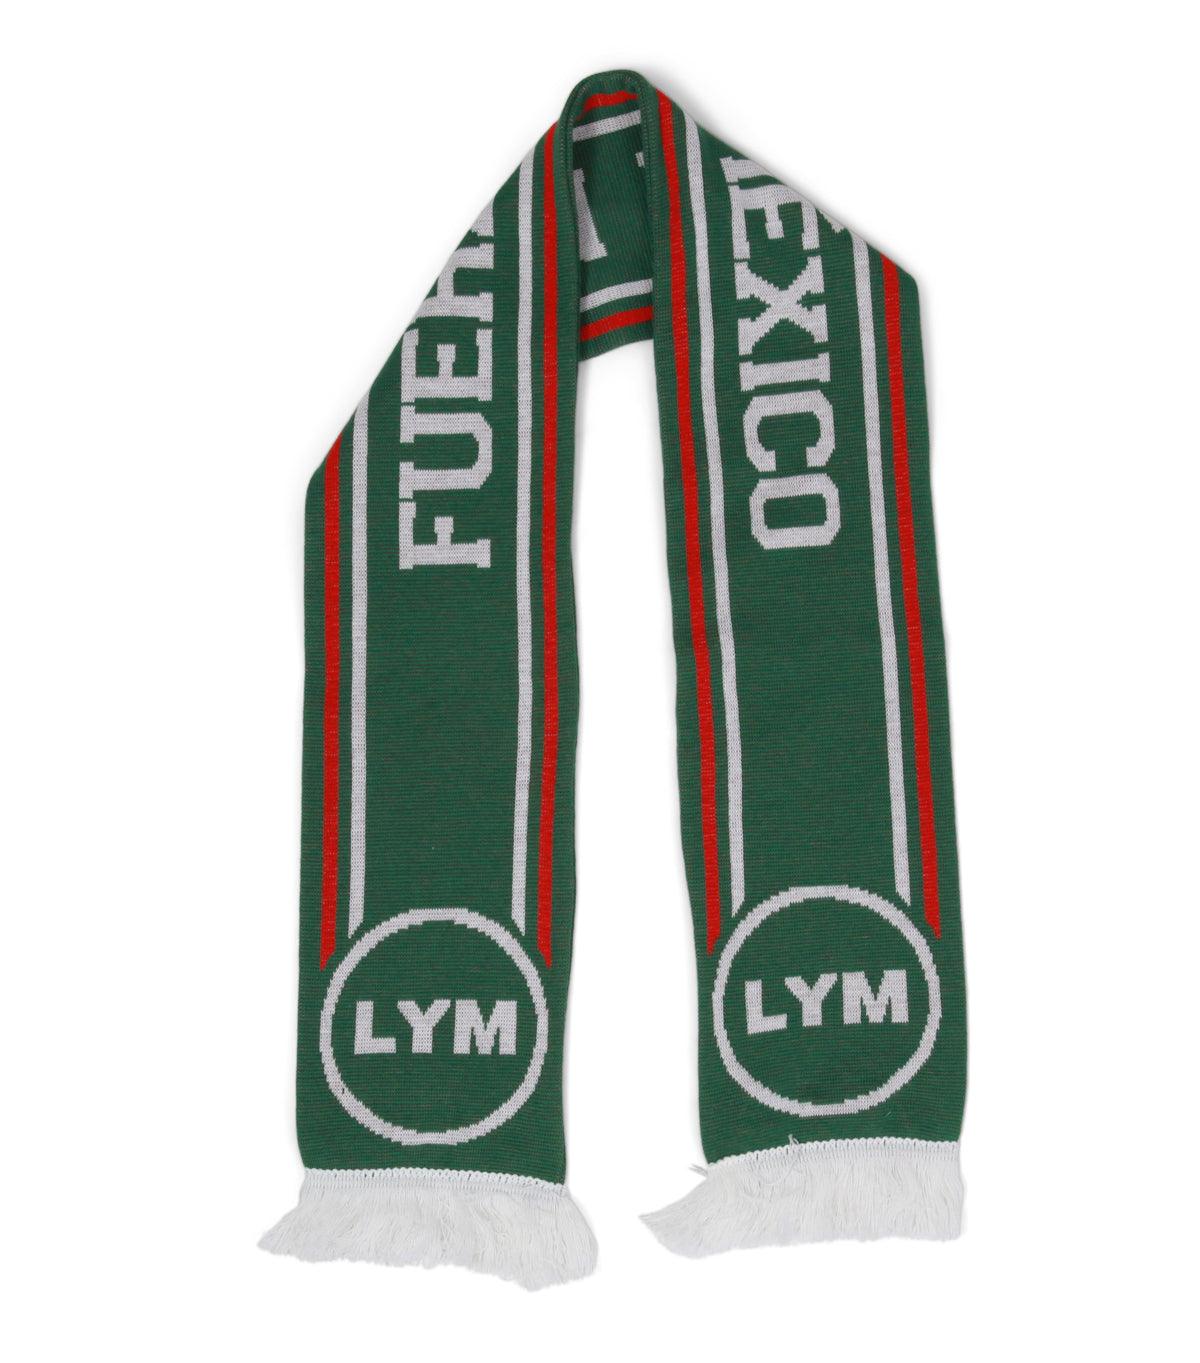 Liberal Youth Ministry Jacquard Knit Football Scarf Green